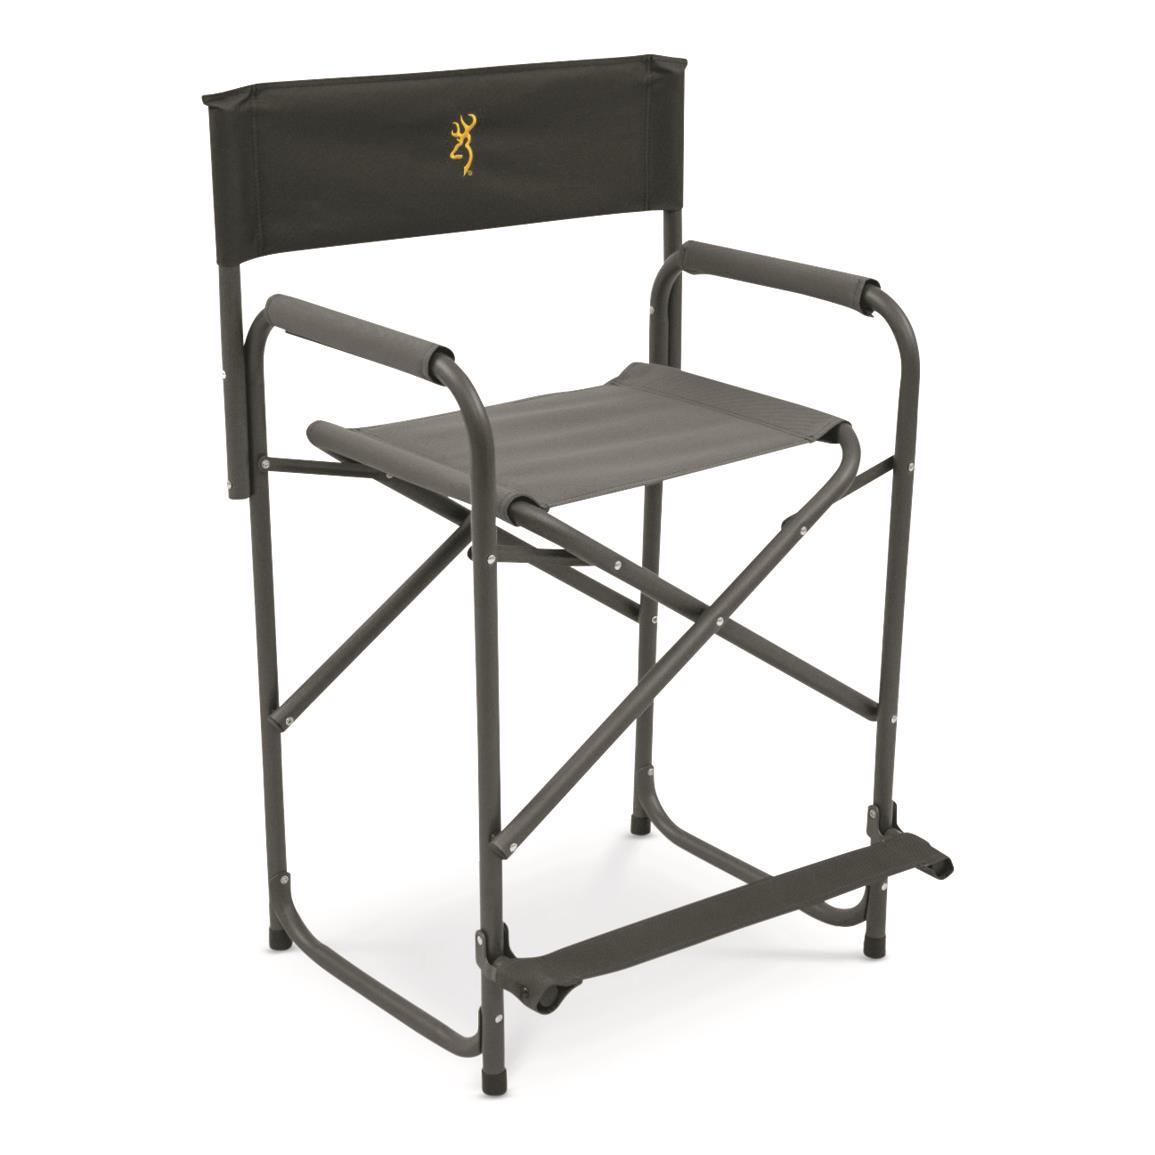 Browning Tall XT Director's Chair, Charcoal